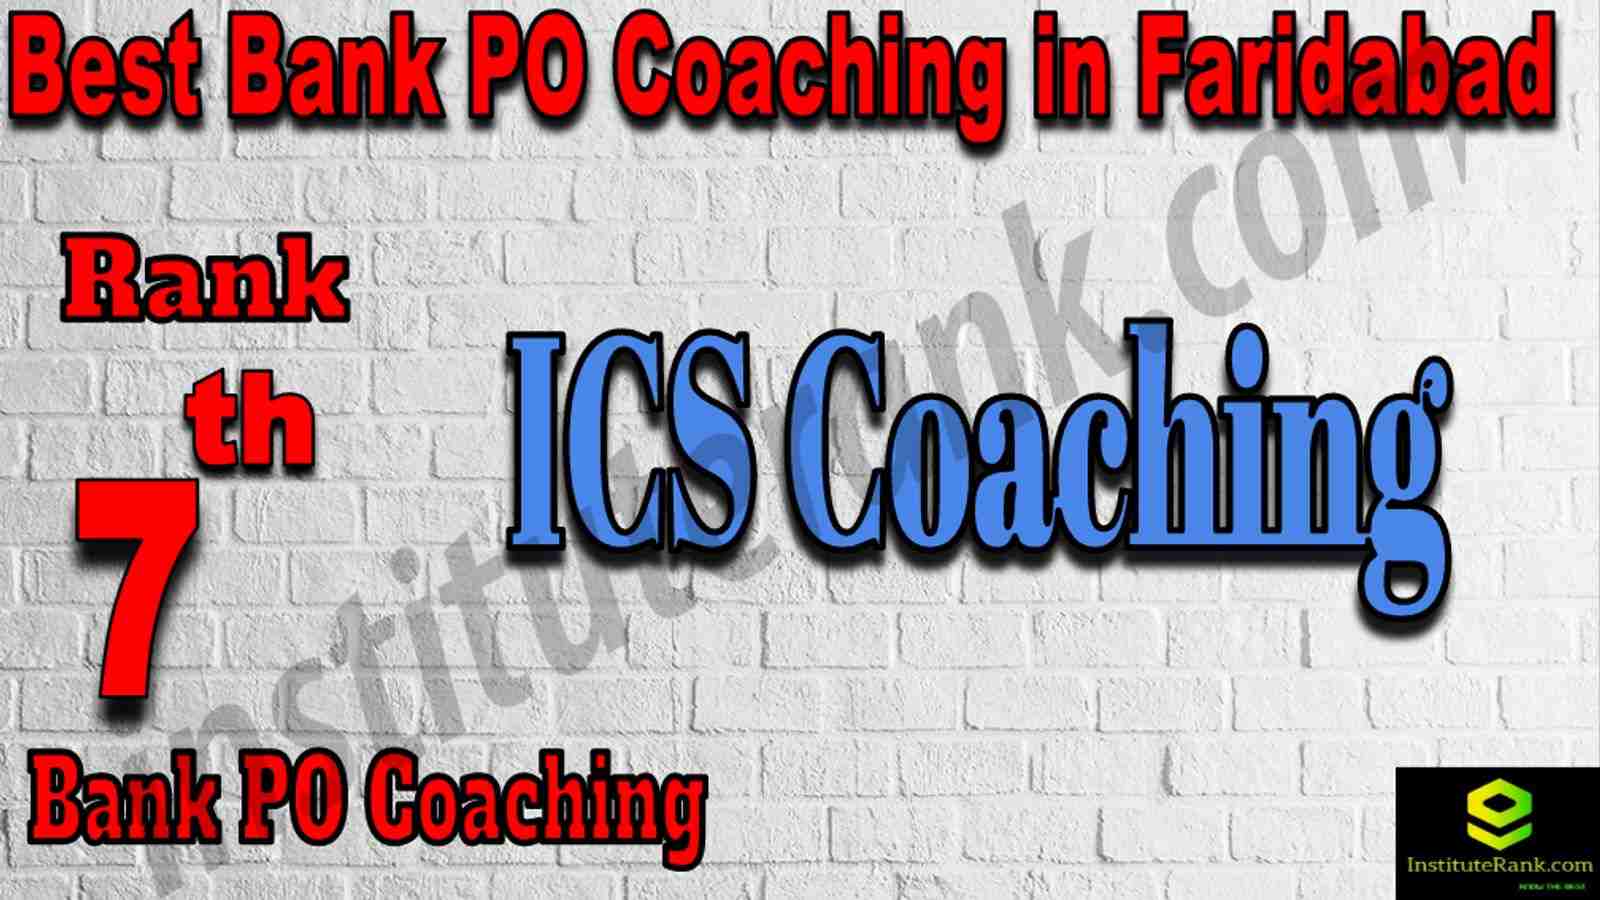 7th Best Bank PO Coaching in Faridabad